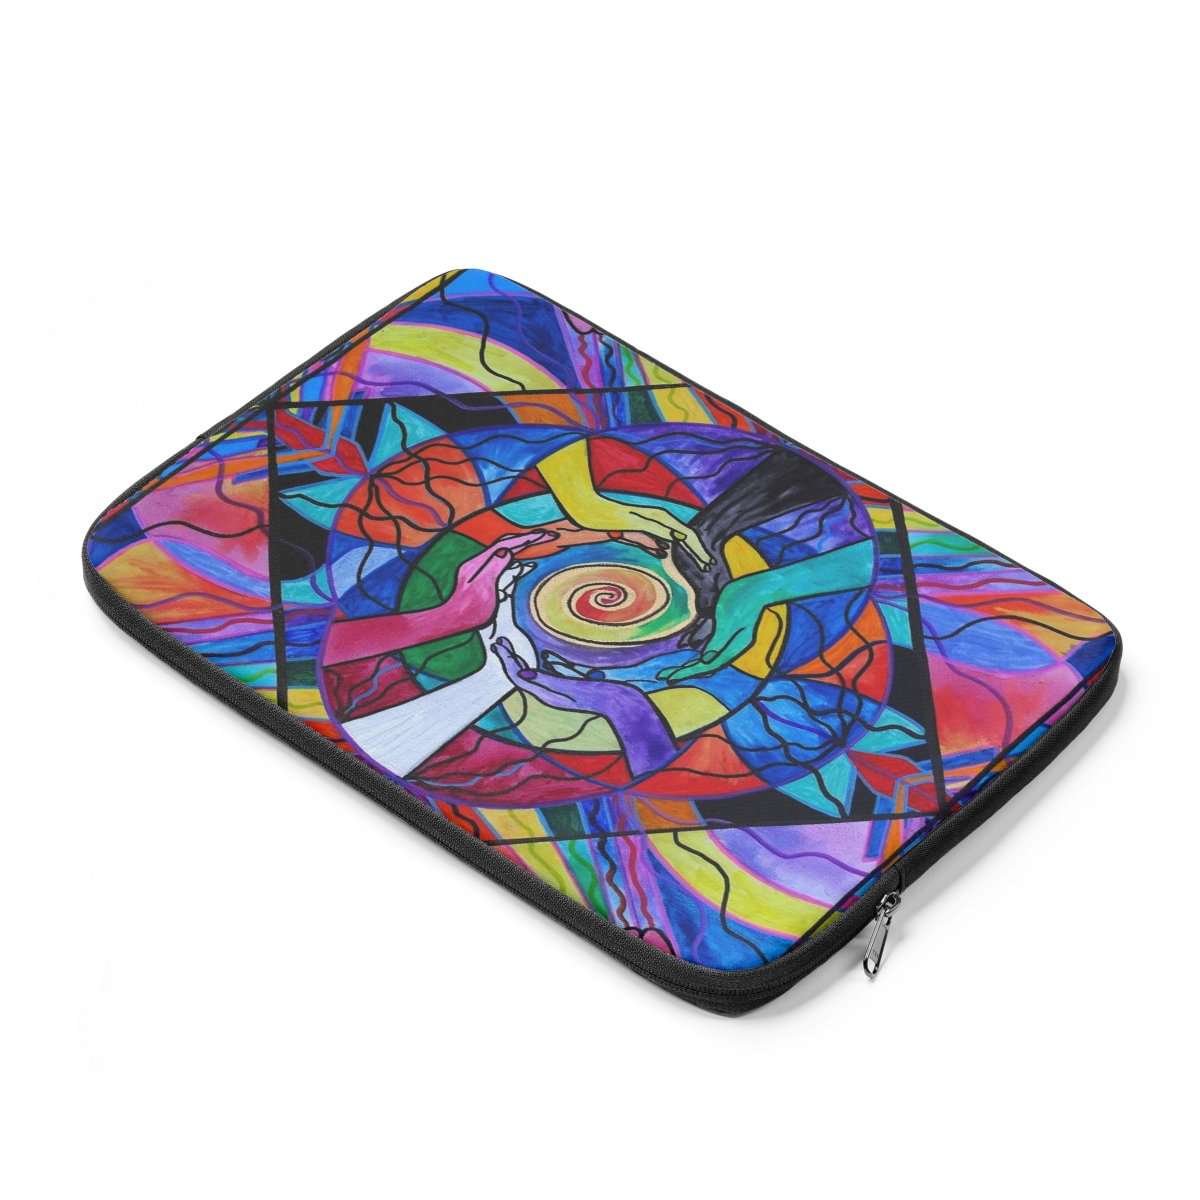 Come together - Laptop Sleeve